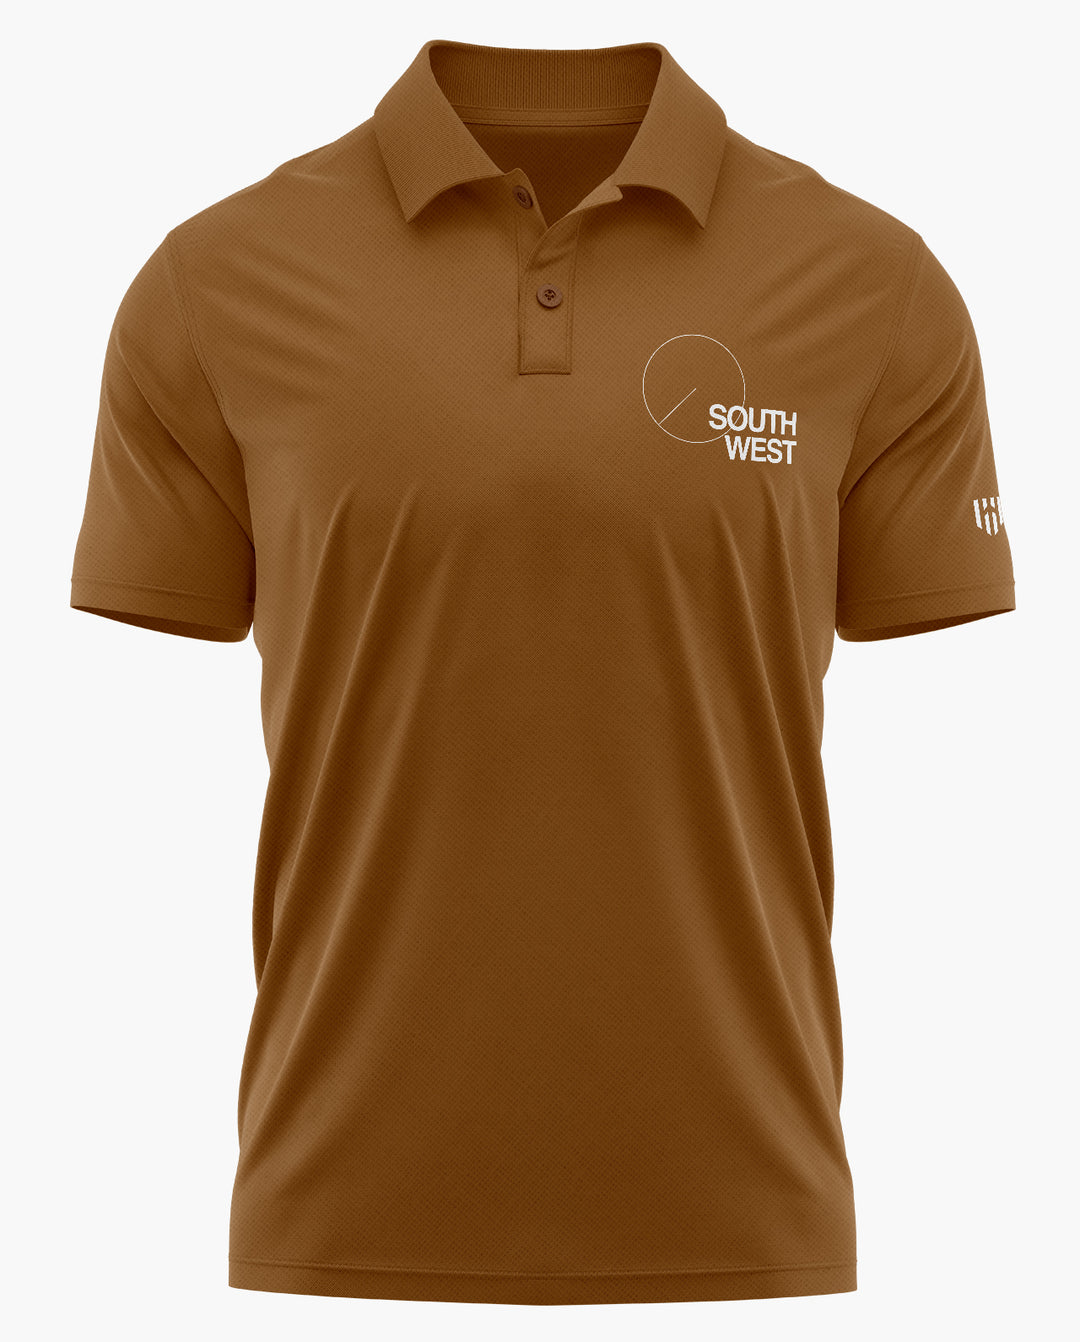 Direction South West Polo T-Shirt